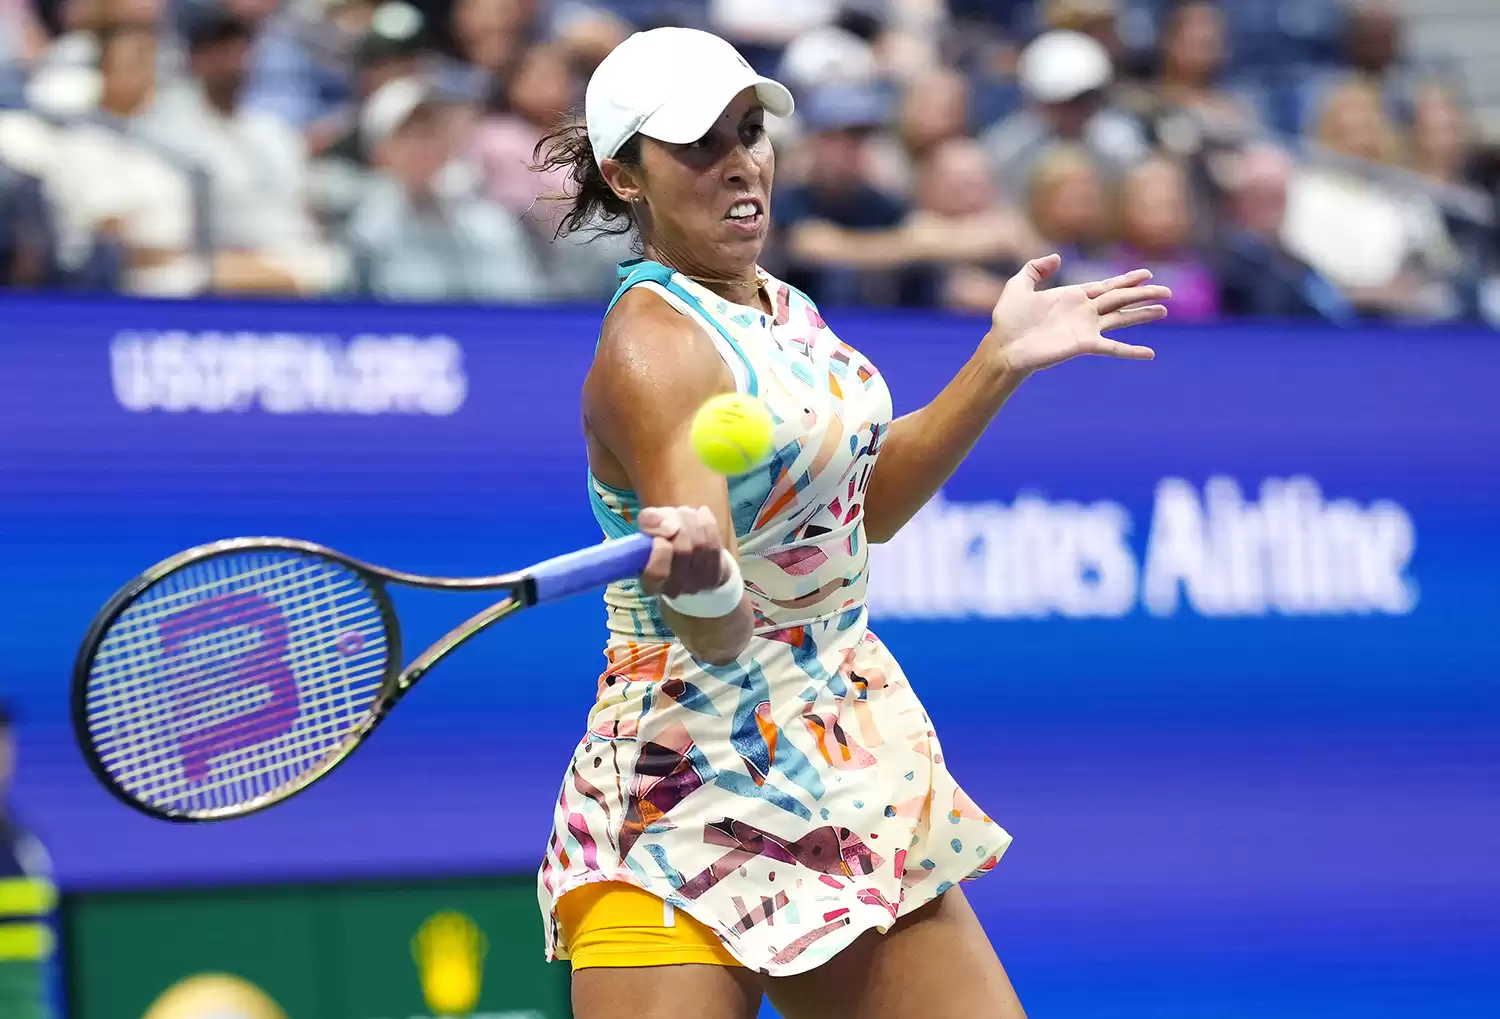 U.S. Open: Madison Keys Advances to Quarterfinals with Dominant Win over Pegula